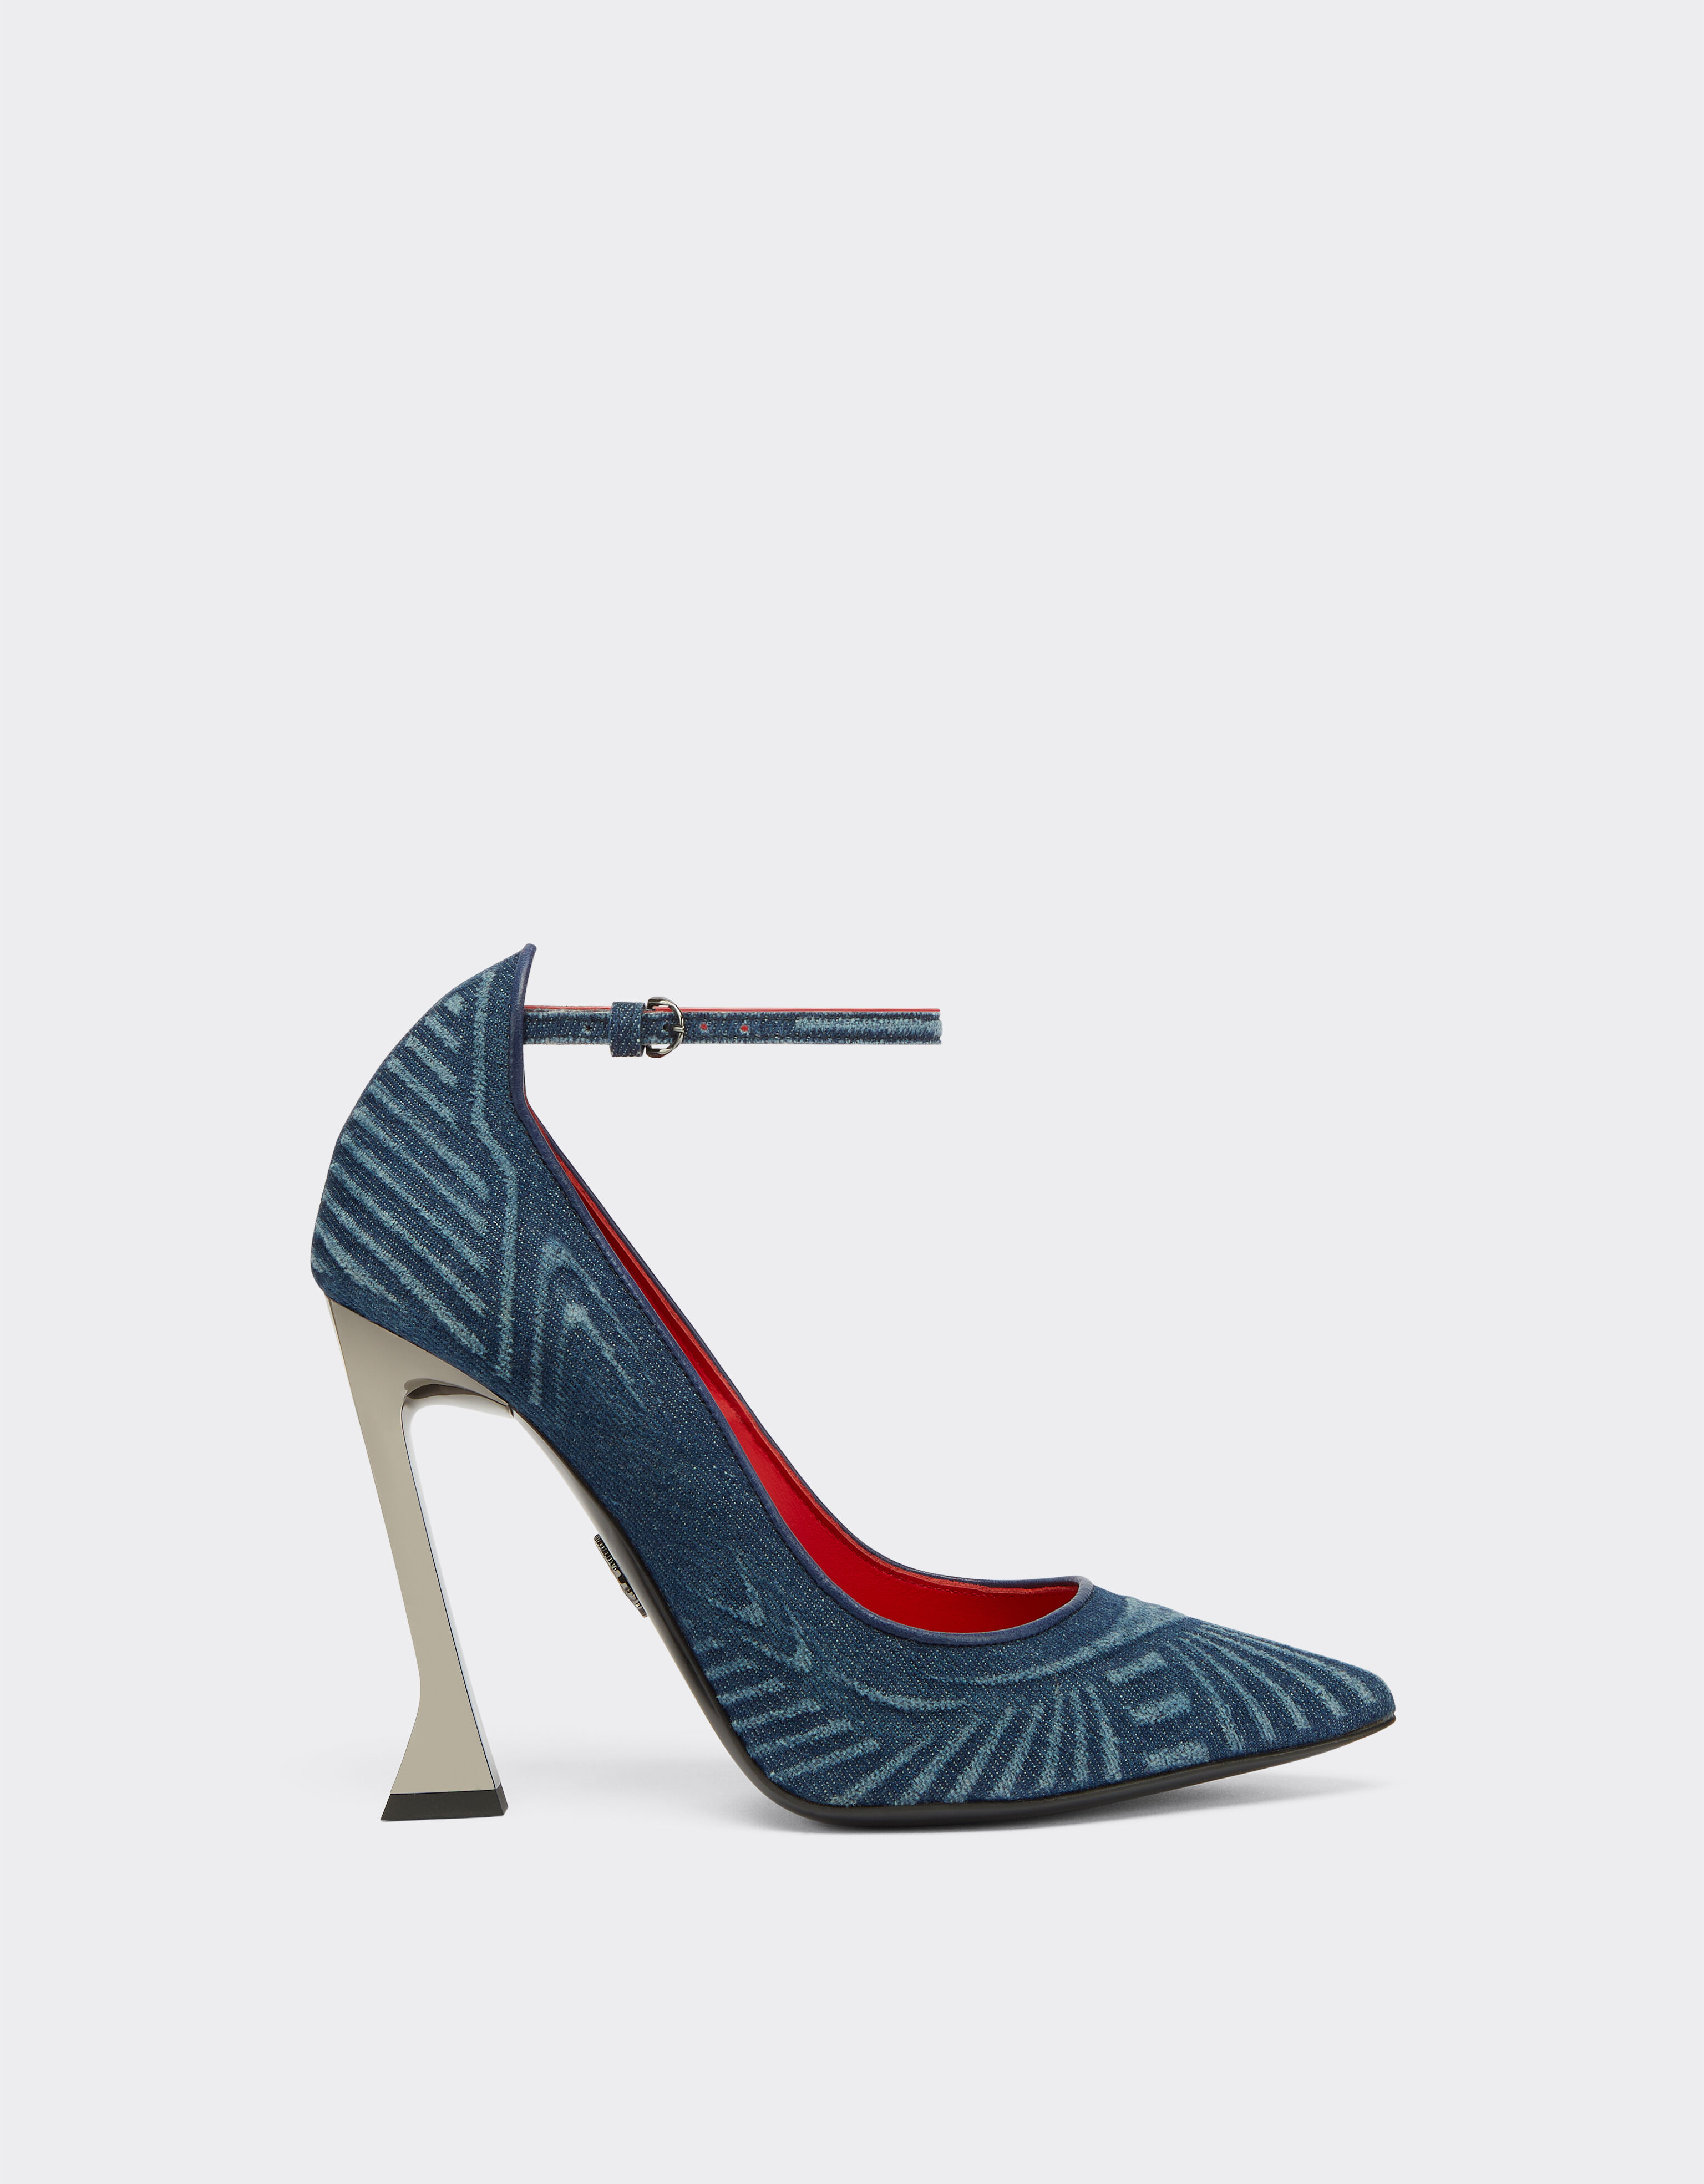 Ferrari Court shoes in denim with strap and livery motif Burgundy 20650f